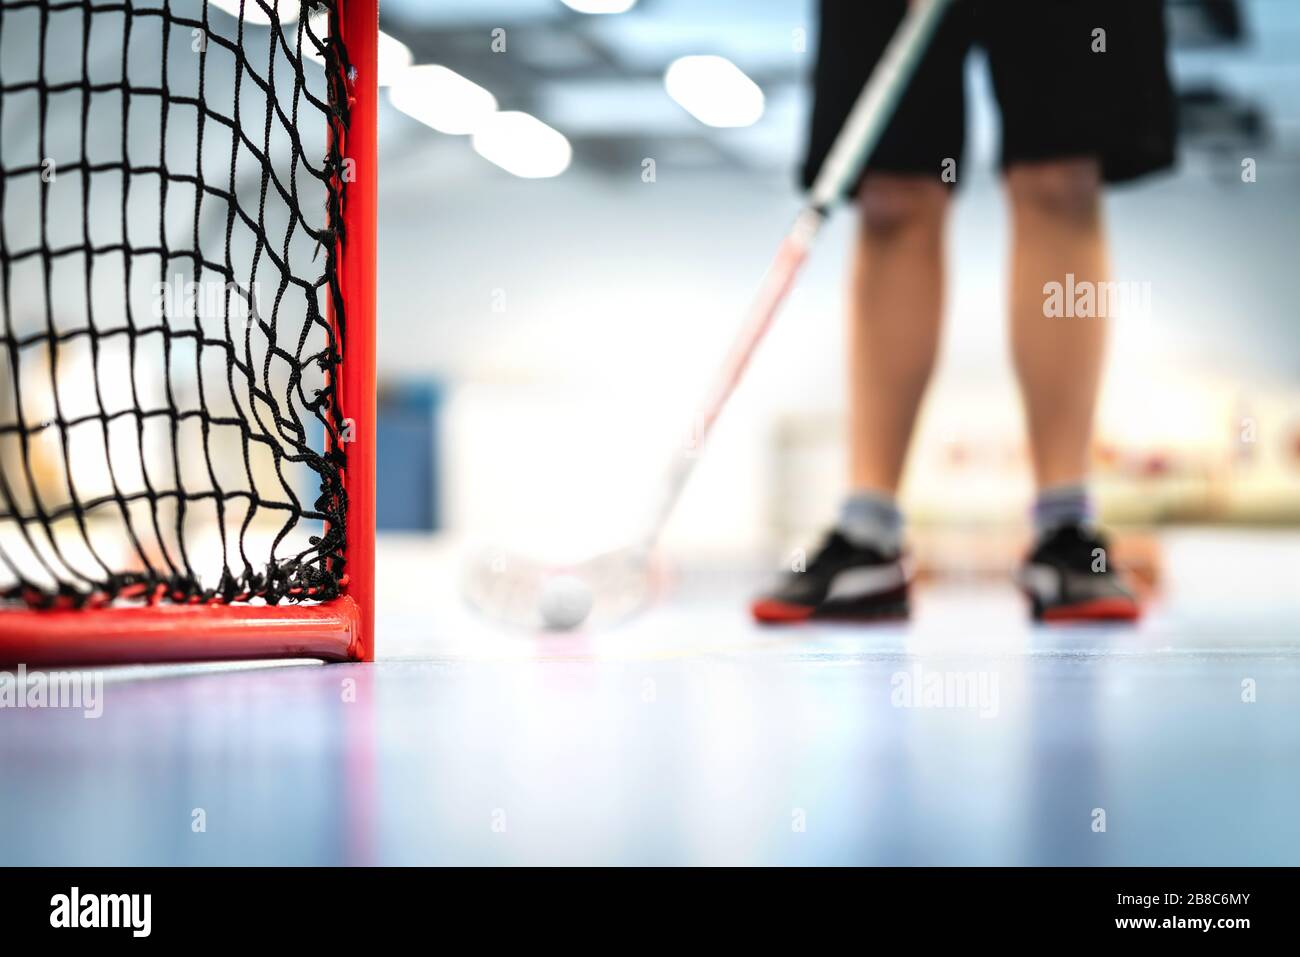 Floorball goal and net. Player training in the background. Man playing floor hockey on court. Stock Photo